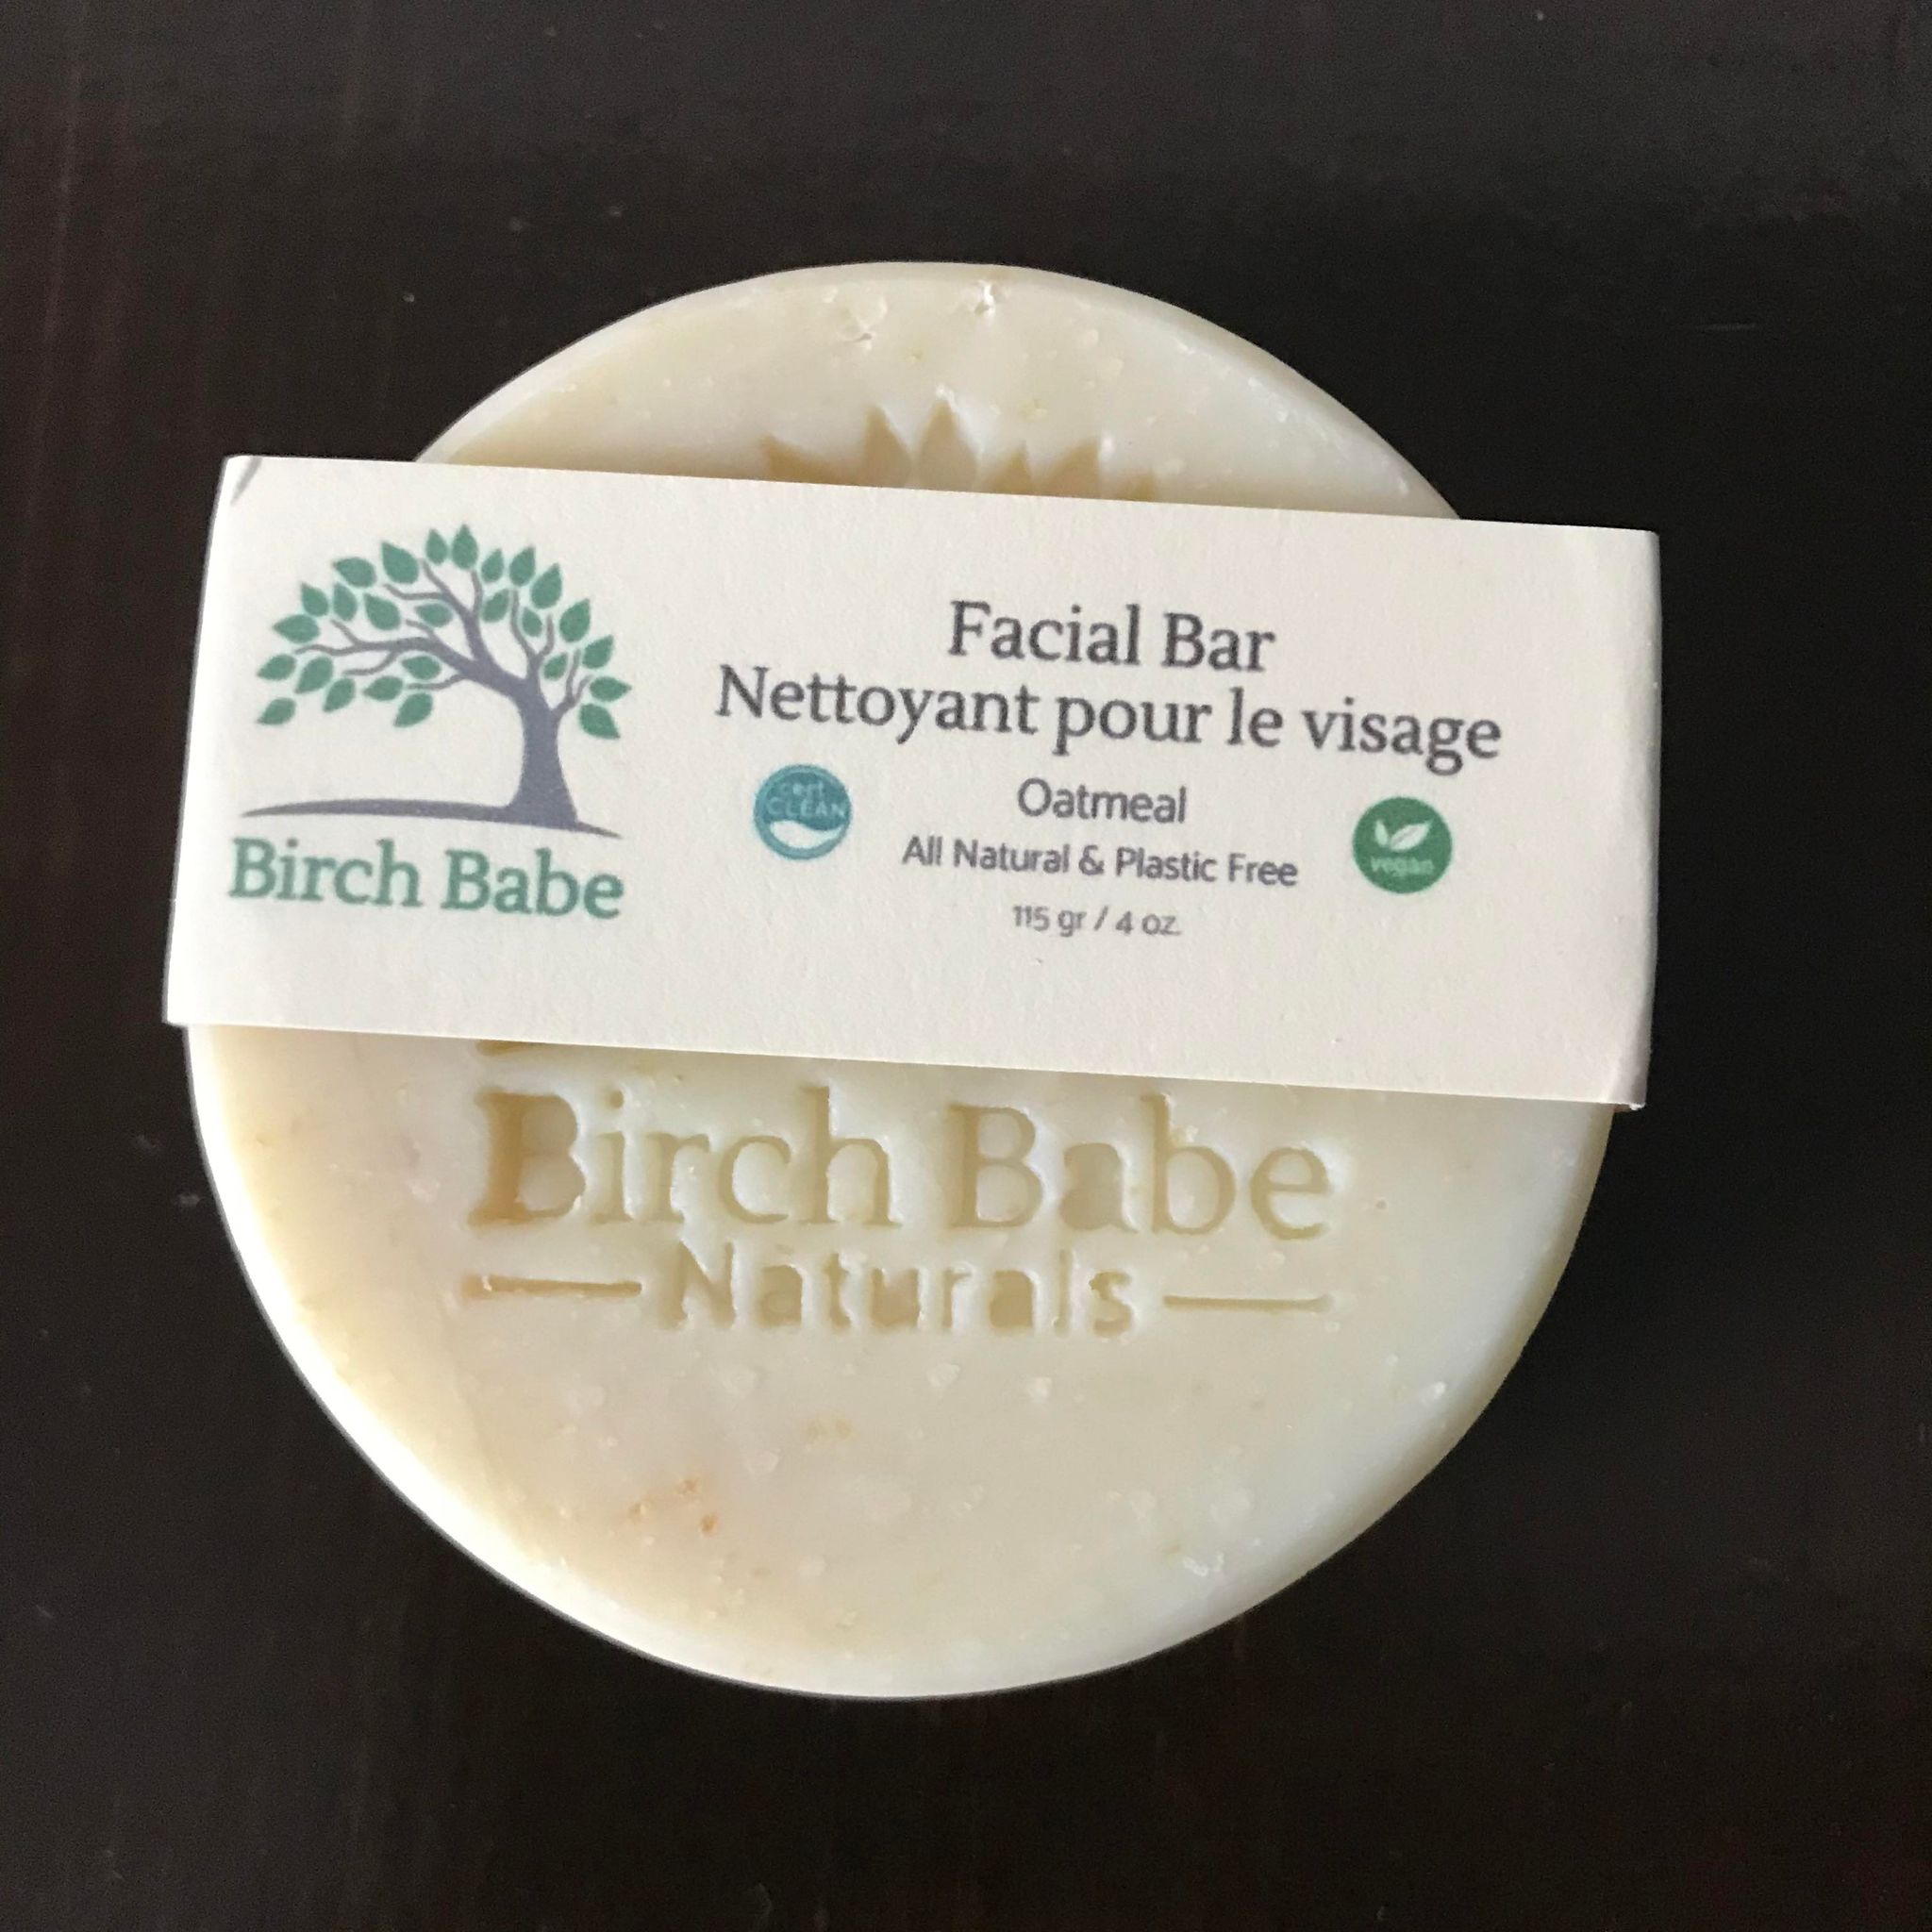 Canadian made round vegan facial bar made with oatmeal for gently cleansing your skin